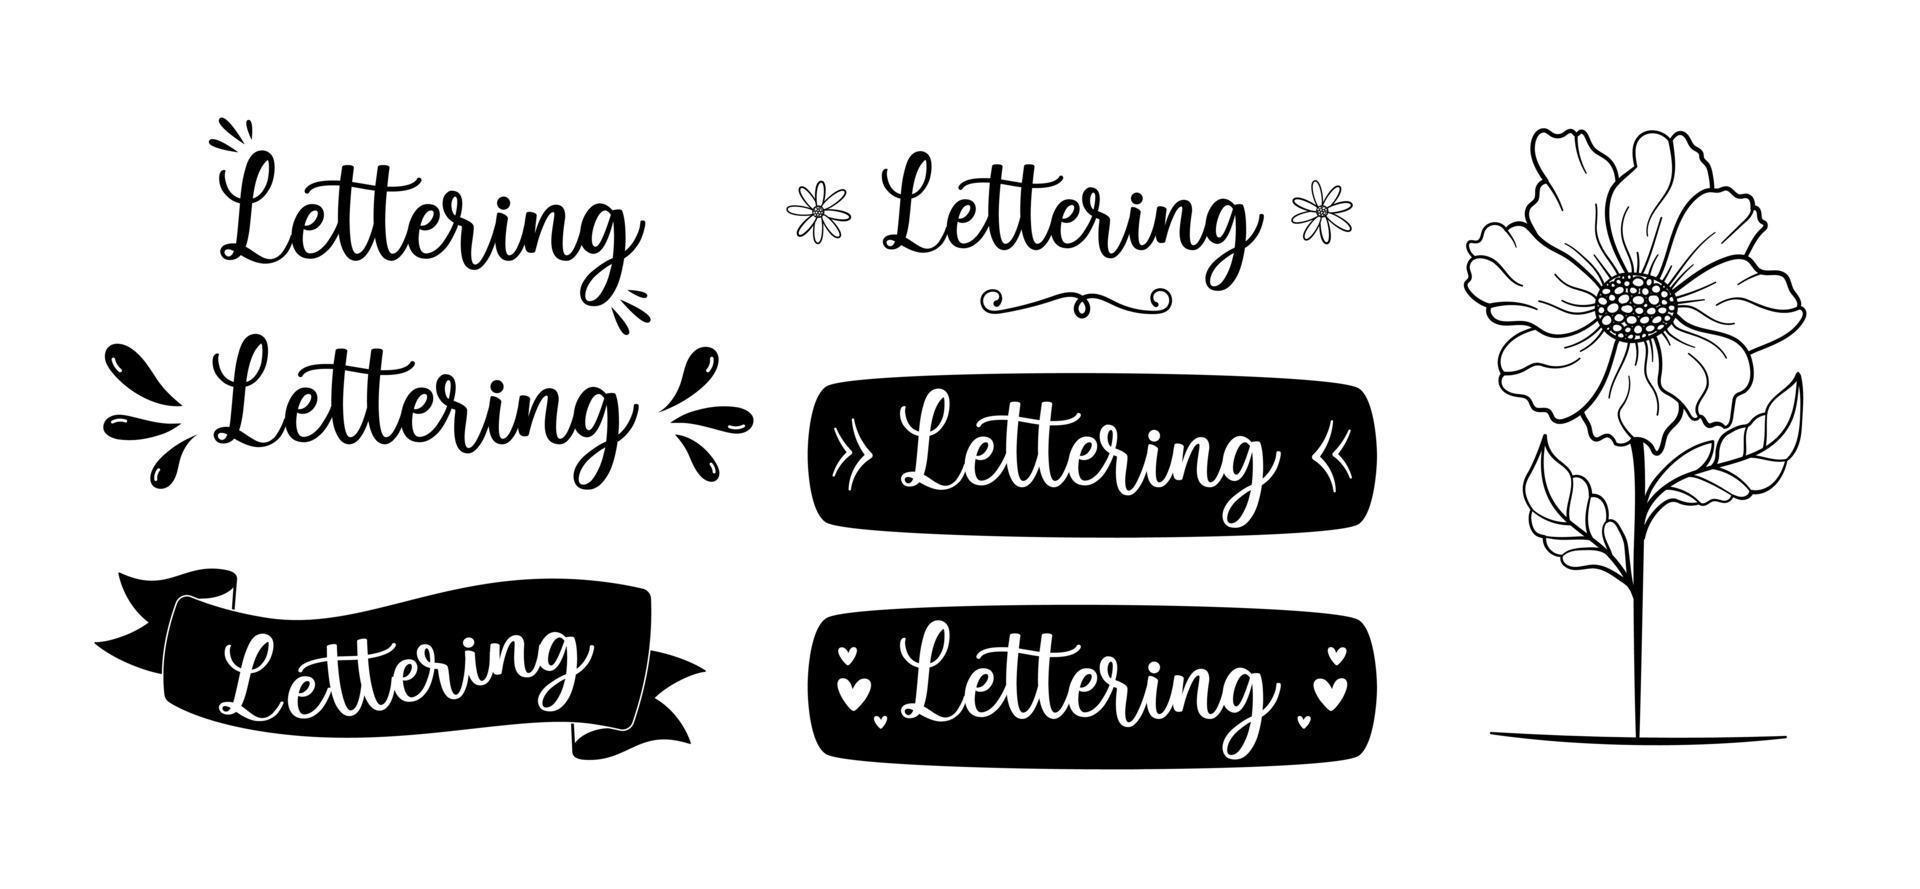 Ribbons, adornments and splash set for lettering and illustrations in different styles. vector